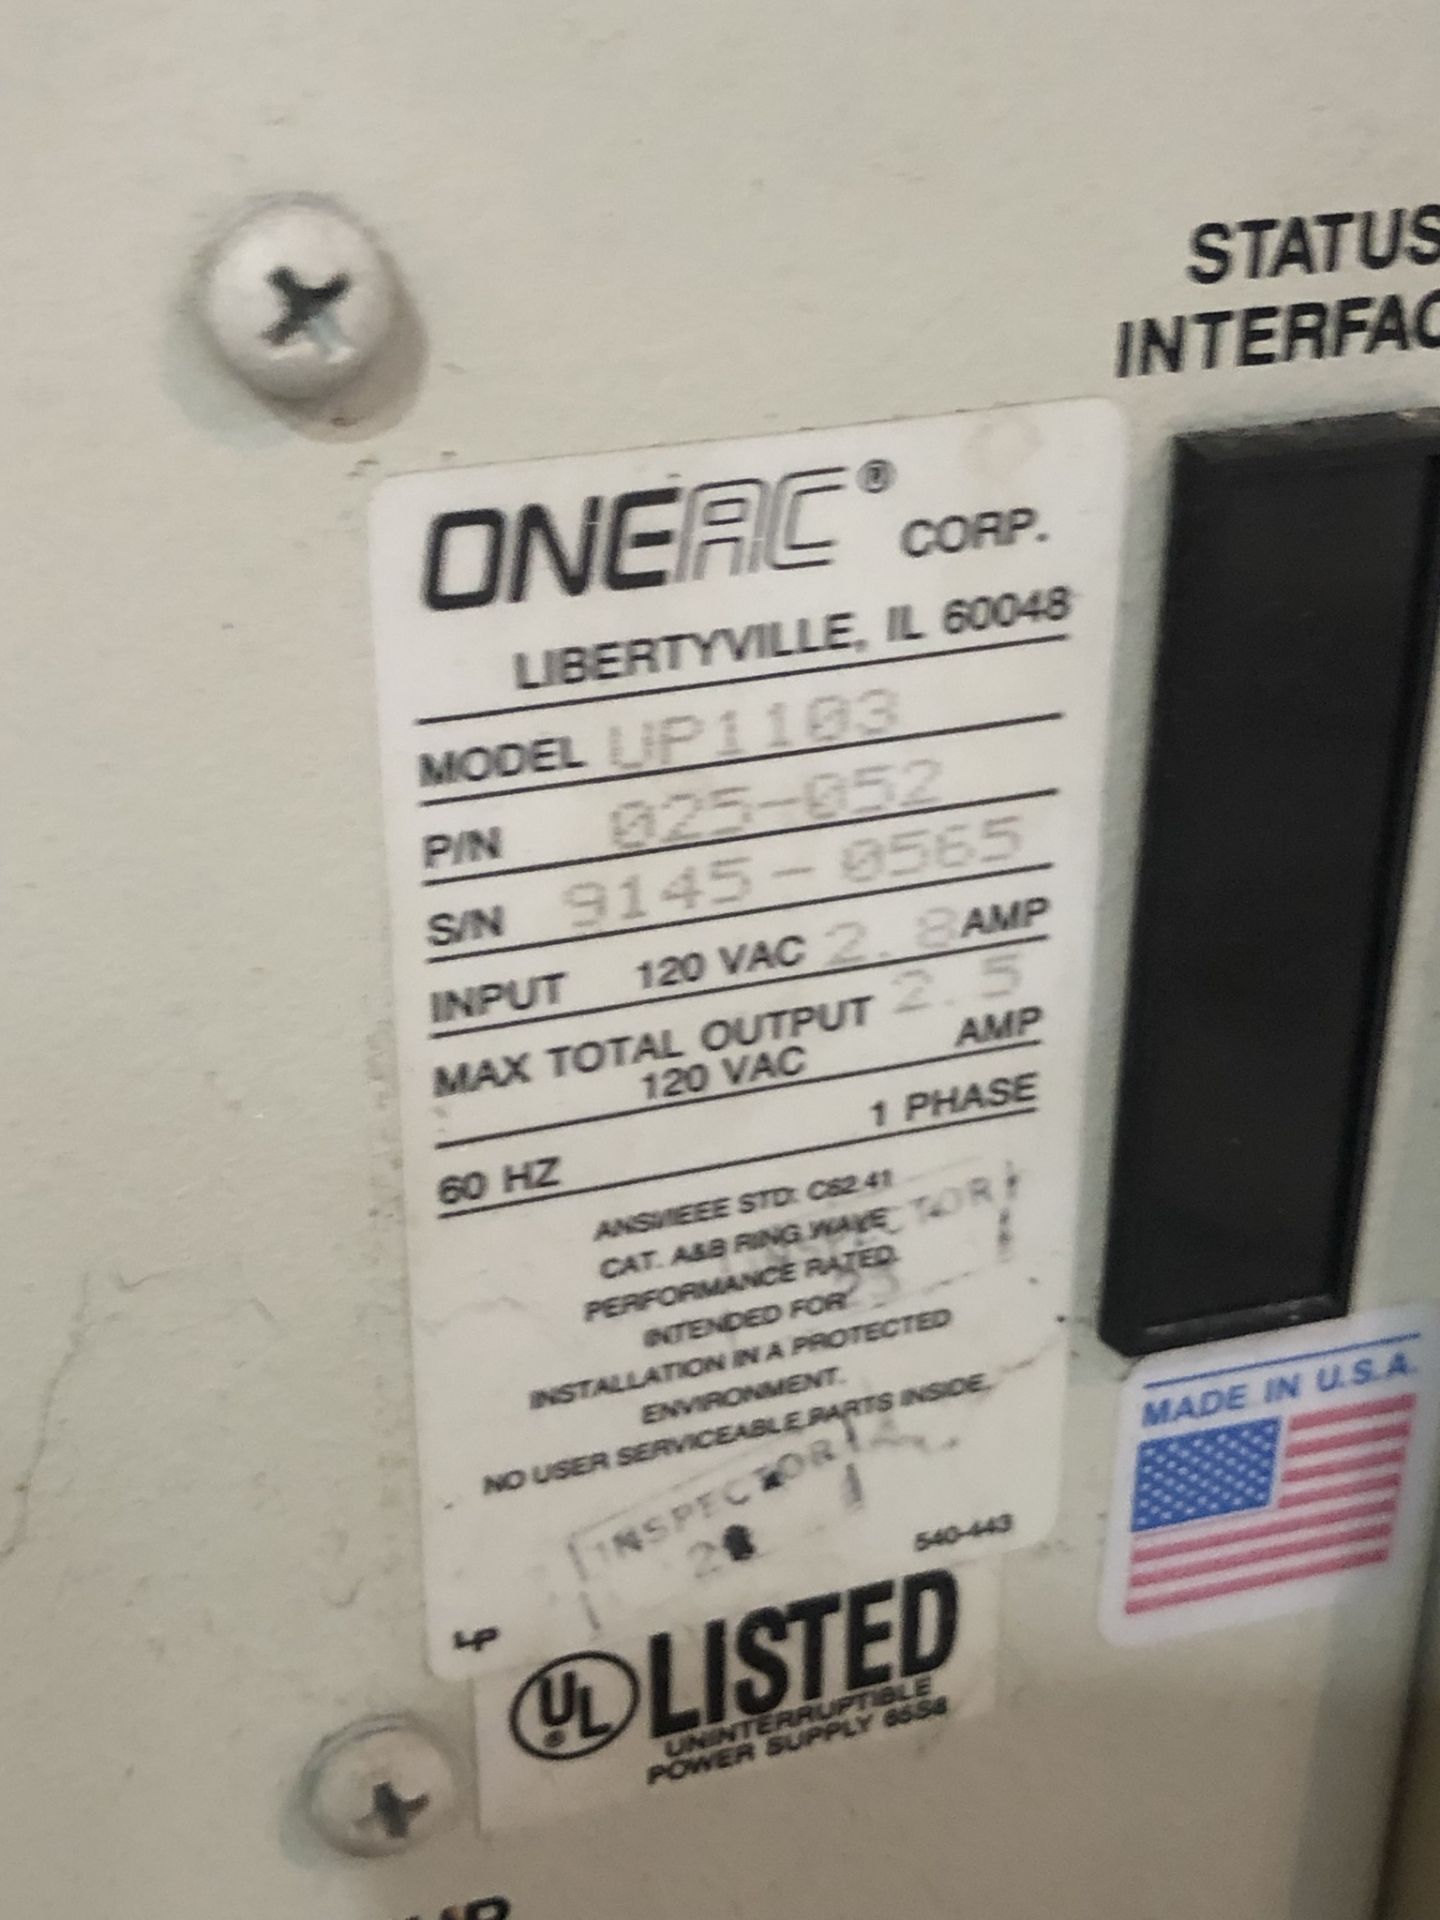 Oneac Corp., Quantity 10, Model UP1103, Uninterruptable Power Supplies (see detail PDF) - Image 5 of 11